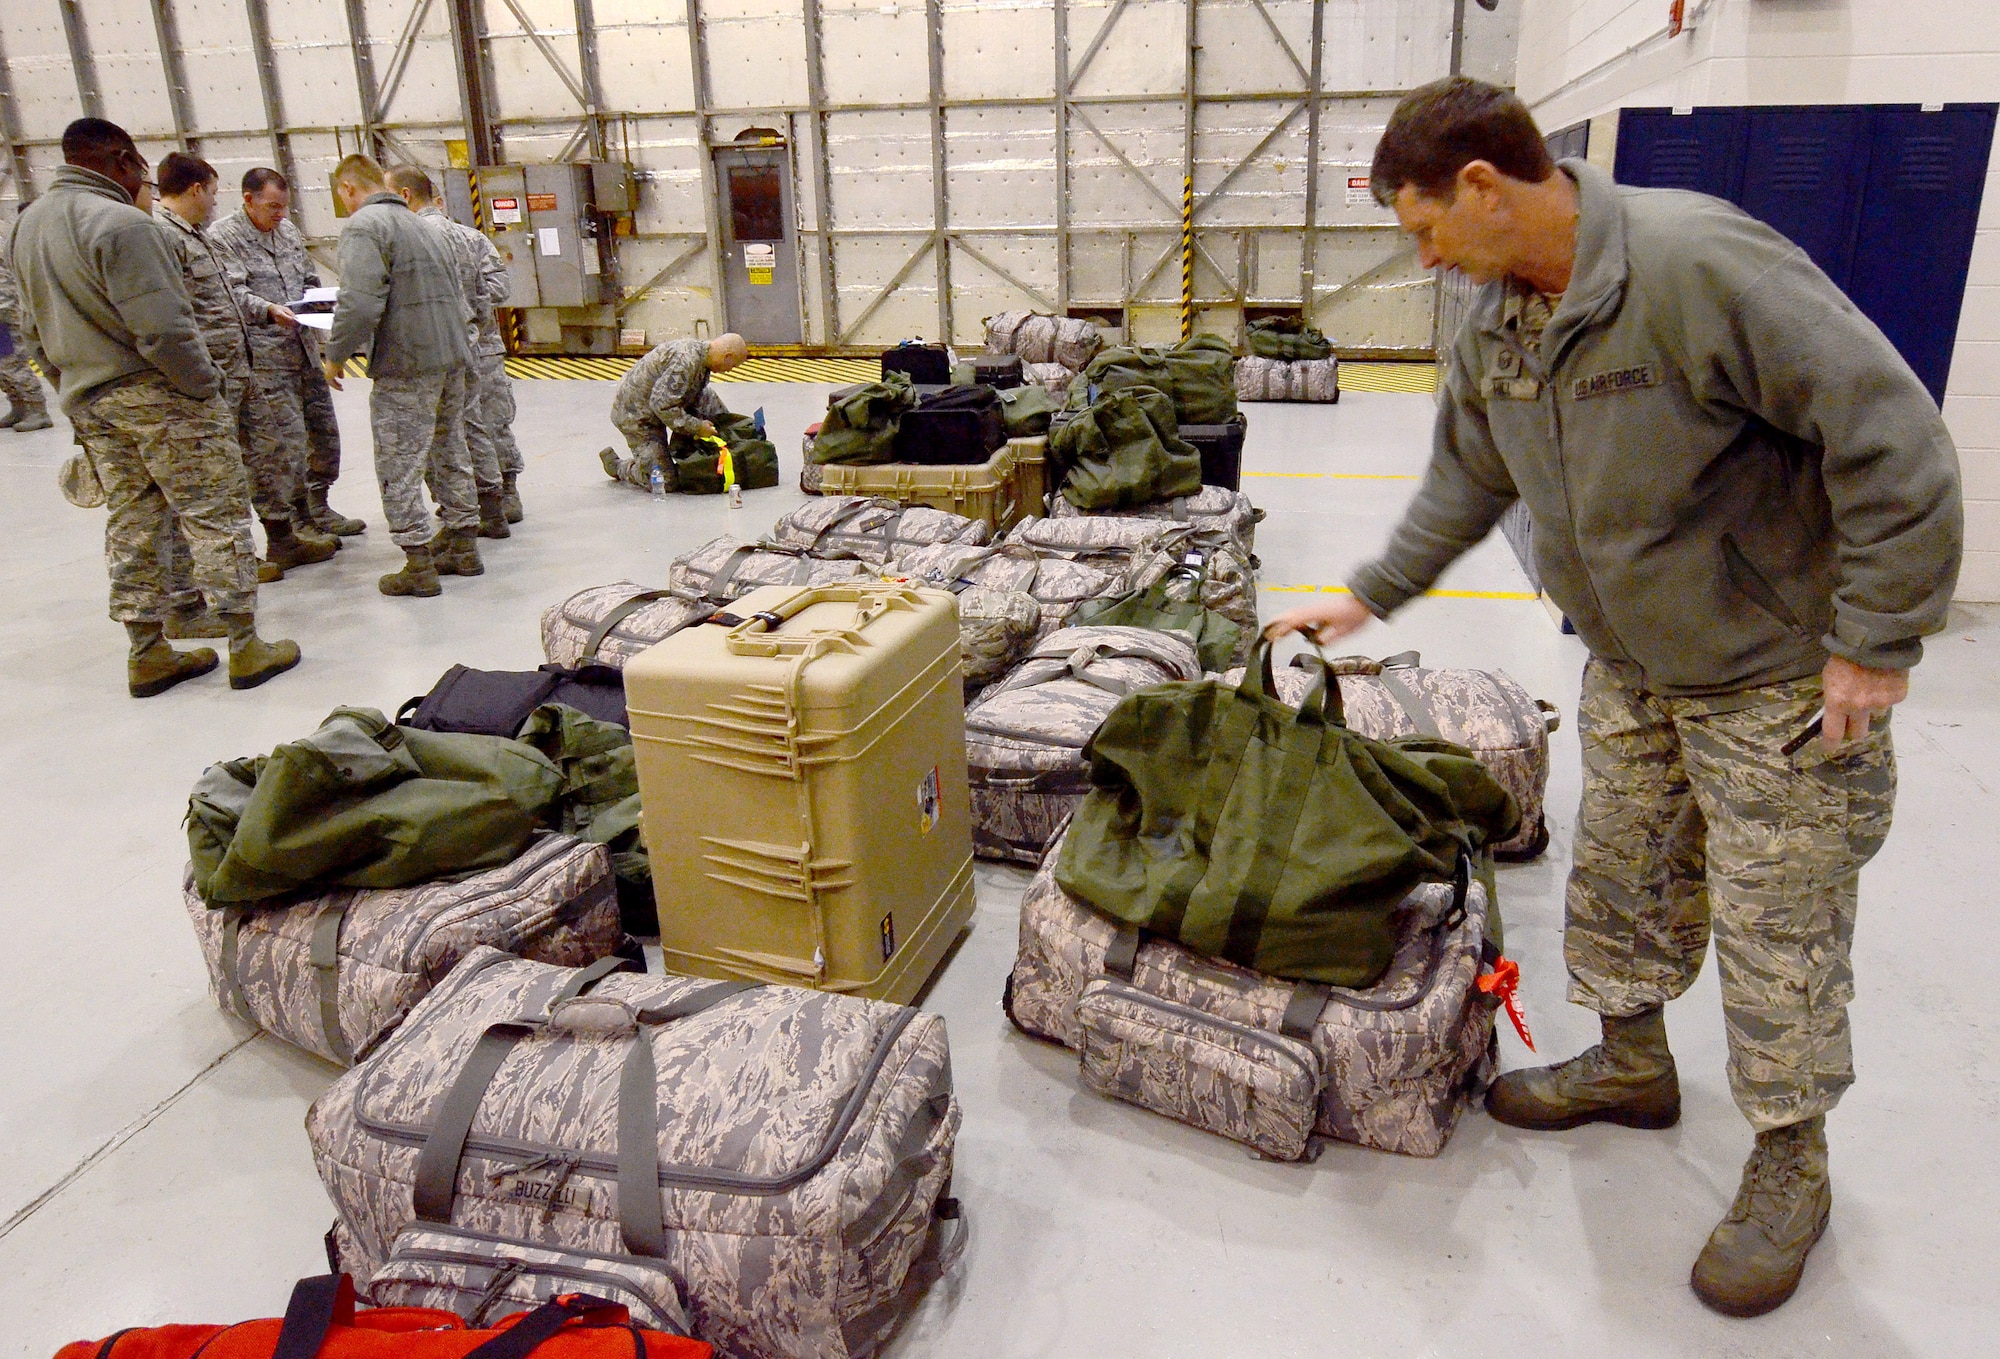 Master Sgt. Francis Hill adds his mobility bags to the growing line-up of deployment baggage being gathered from members of the 94th Airlift Wing in preparation for their up-coming Southwest Asia deployment, Jan. 2, 2015 at Dobbins Air Reserve Base, Ga.  (U.S. Air Force photo/Brad Fallin)